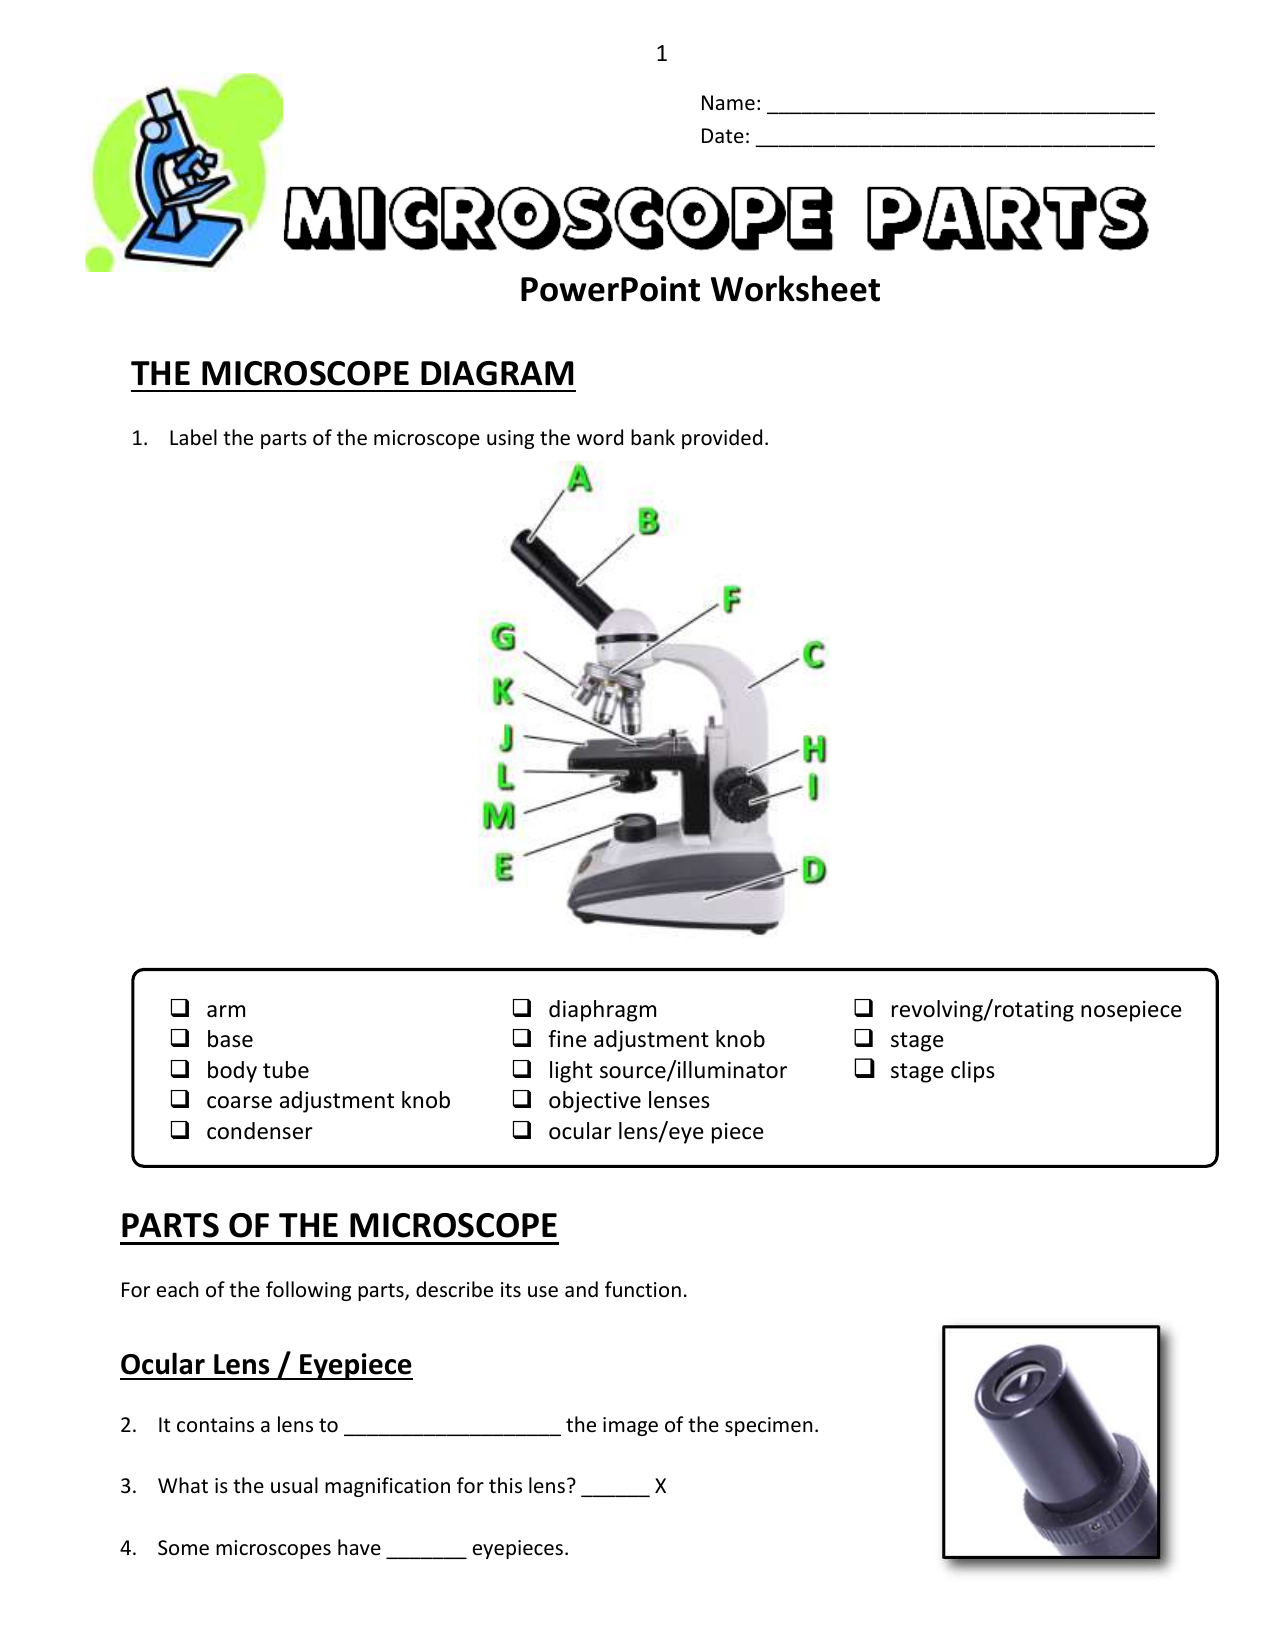 11 - Microscope Parts - PowerPoint Worksheet copy In Microscope Parts And Use Worksheet